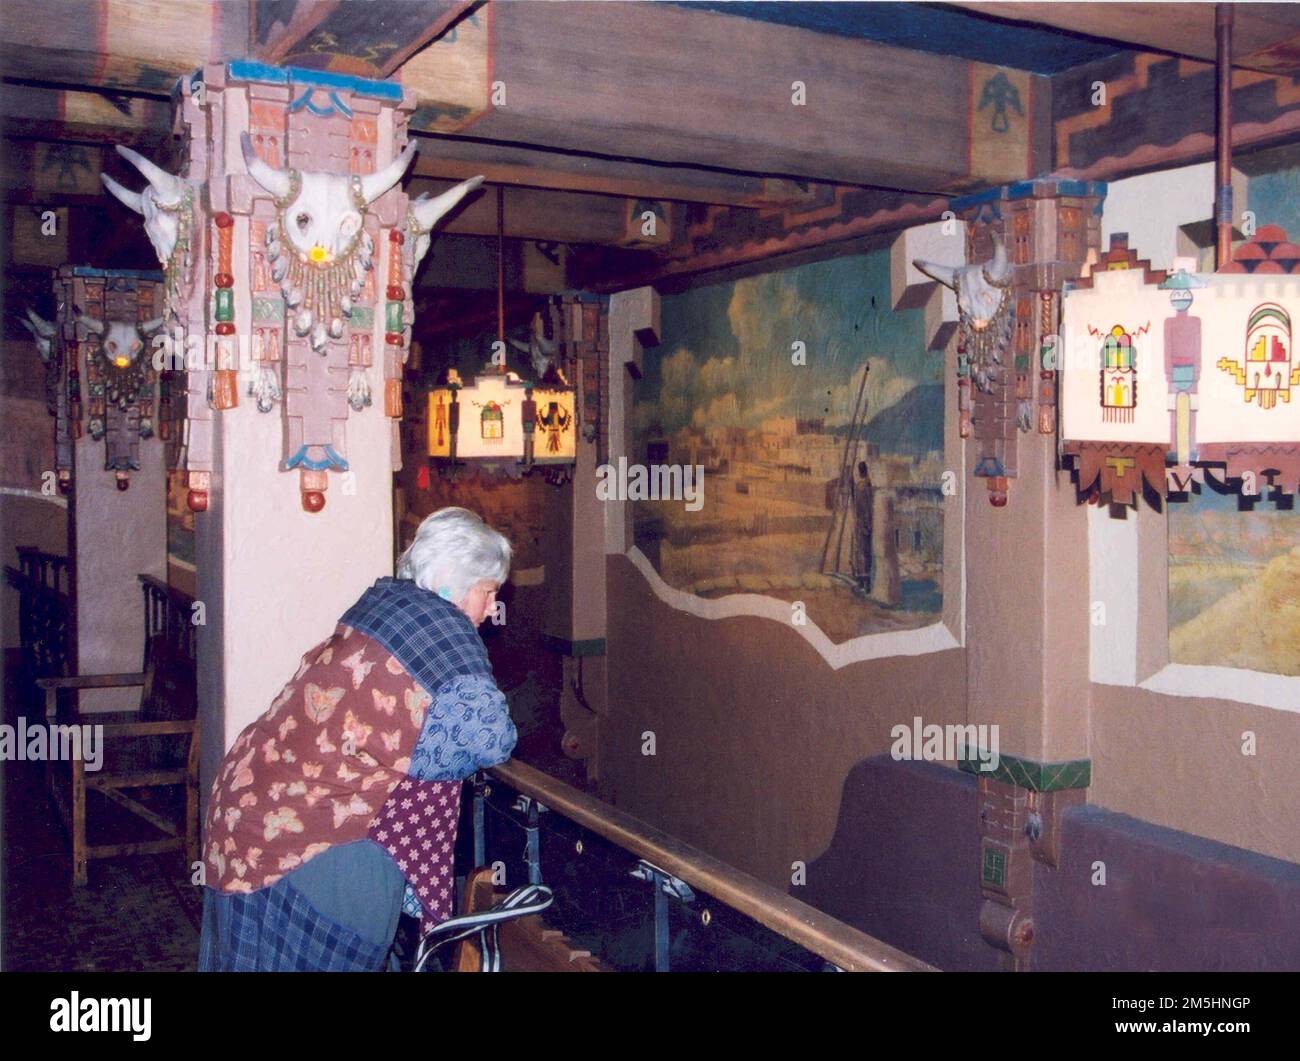 Historic Route 66 - KiMo Theater Lobby. A theater patron admires the Kimo Theater lobby from the balcony. New Mexico (35.085° N 106.651° W) Stock Photo